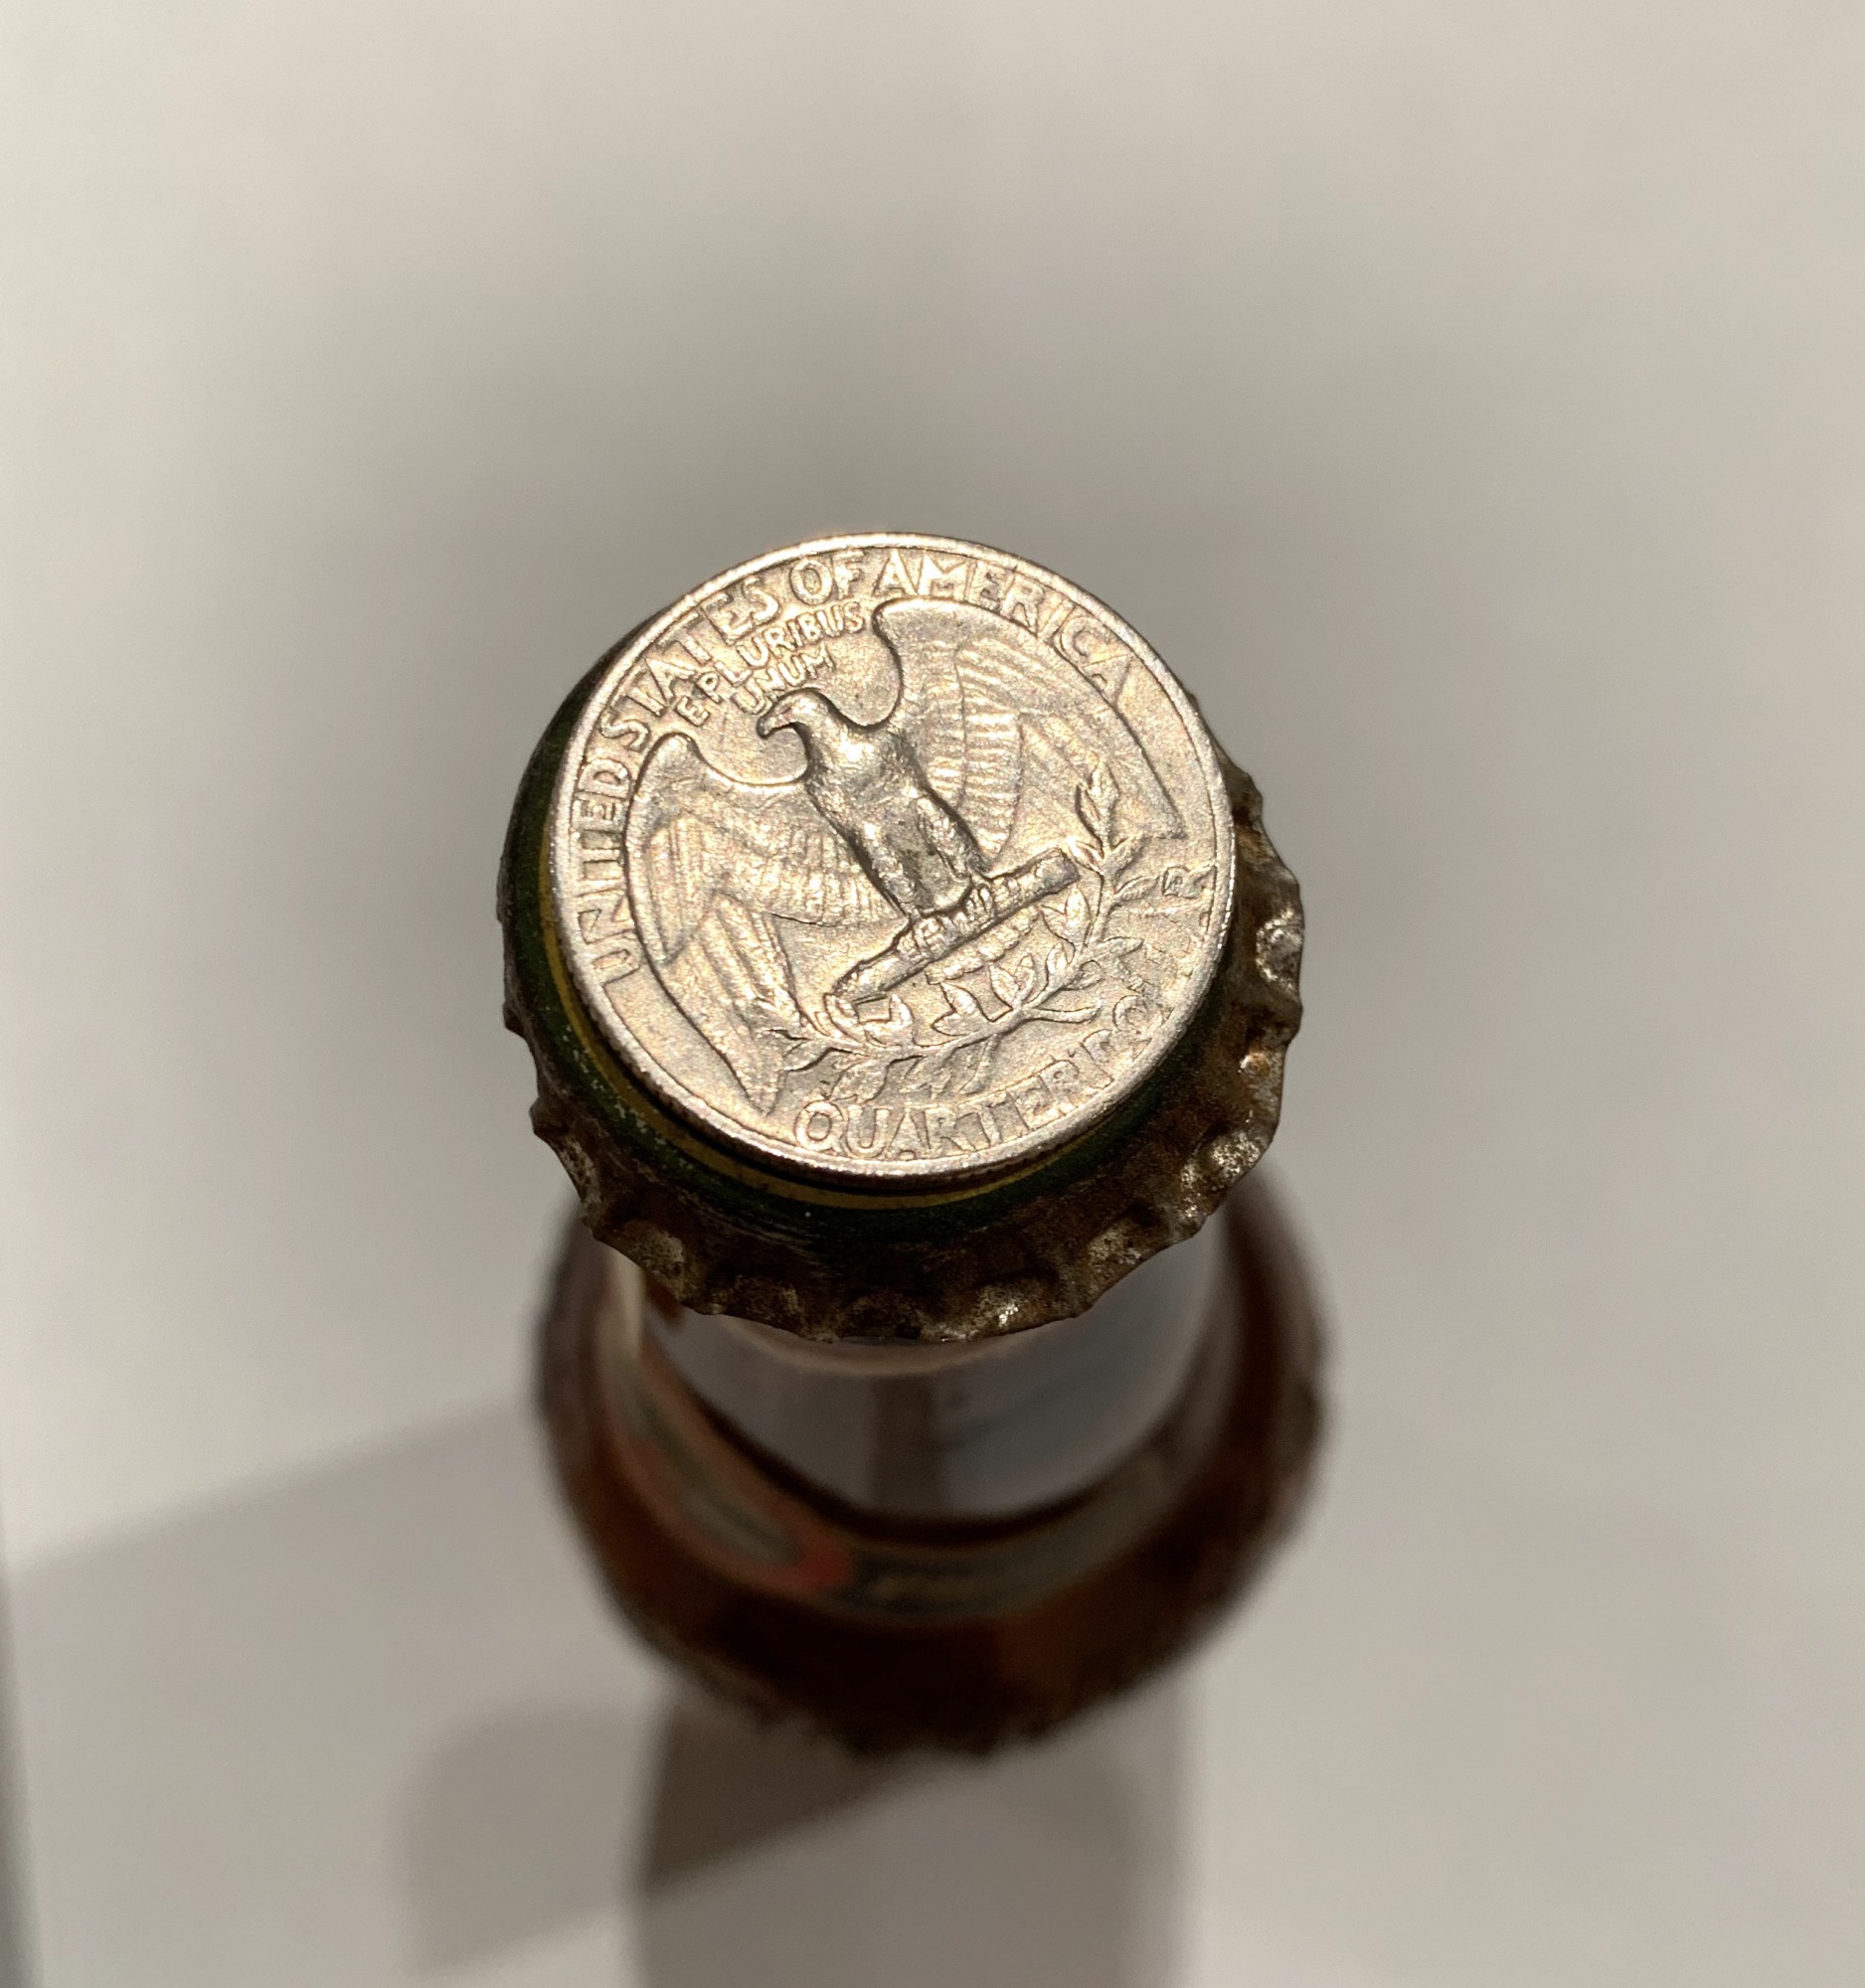 Top-down photo of an antique beer bottle with a USA quarter on the bottle cap.